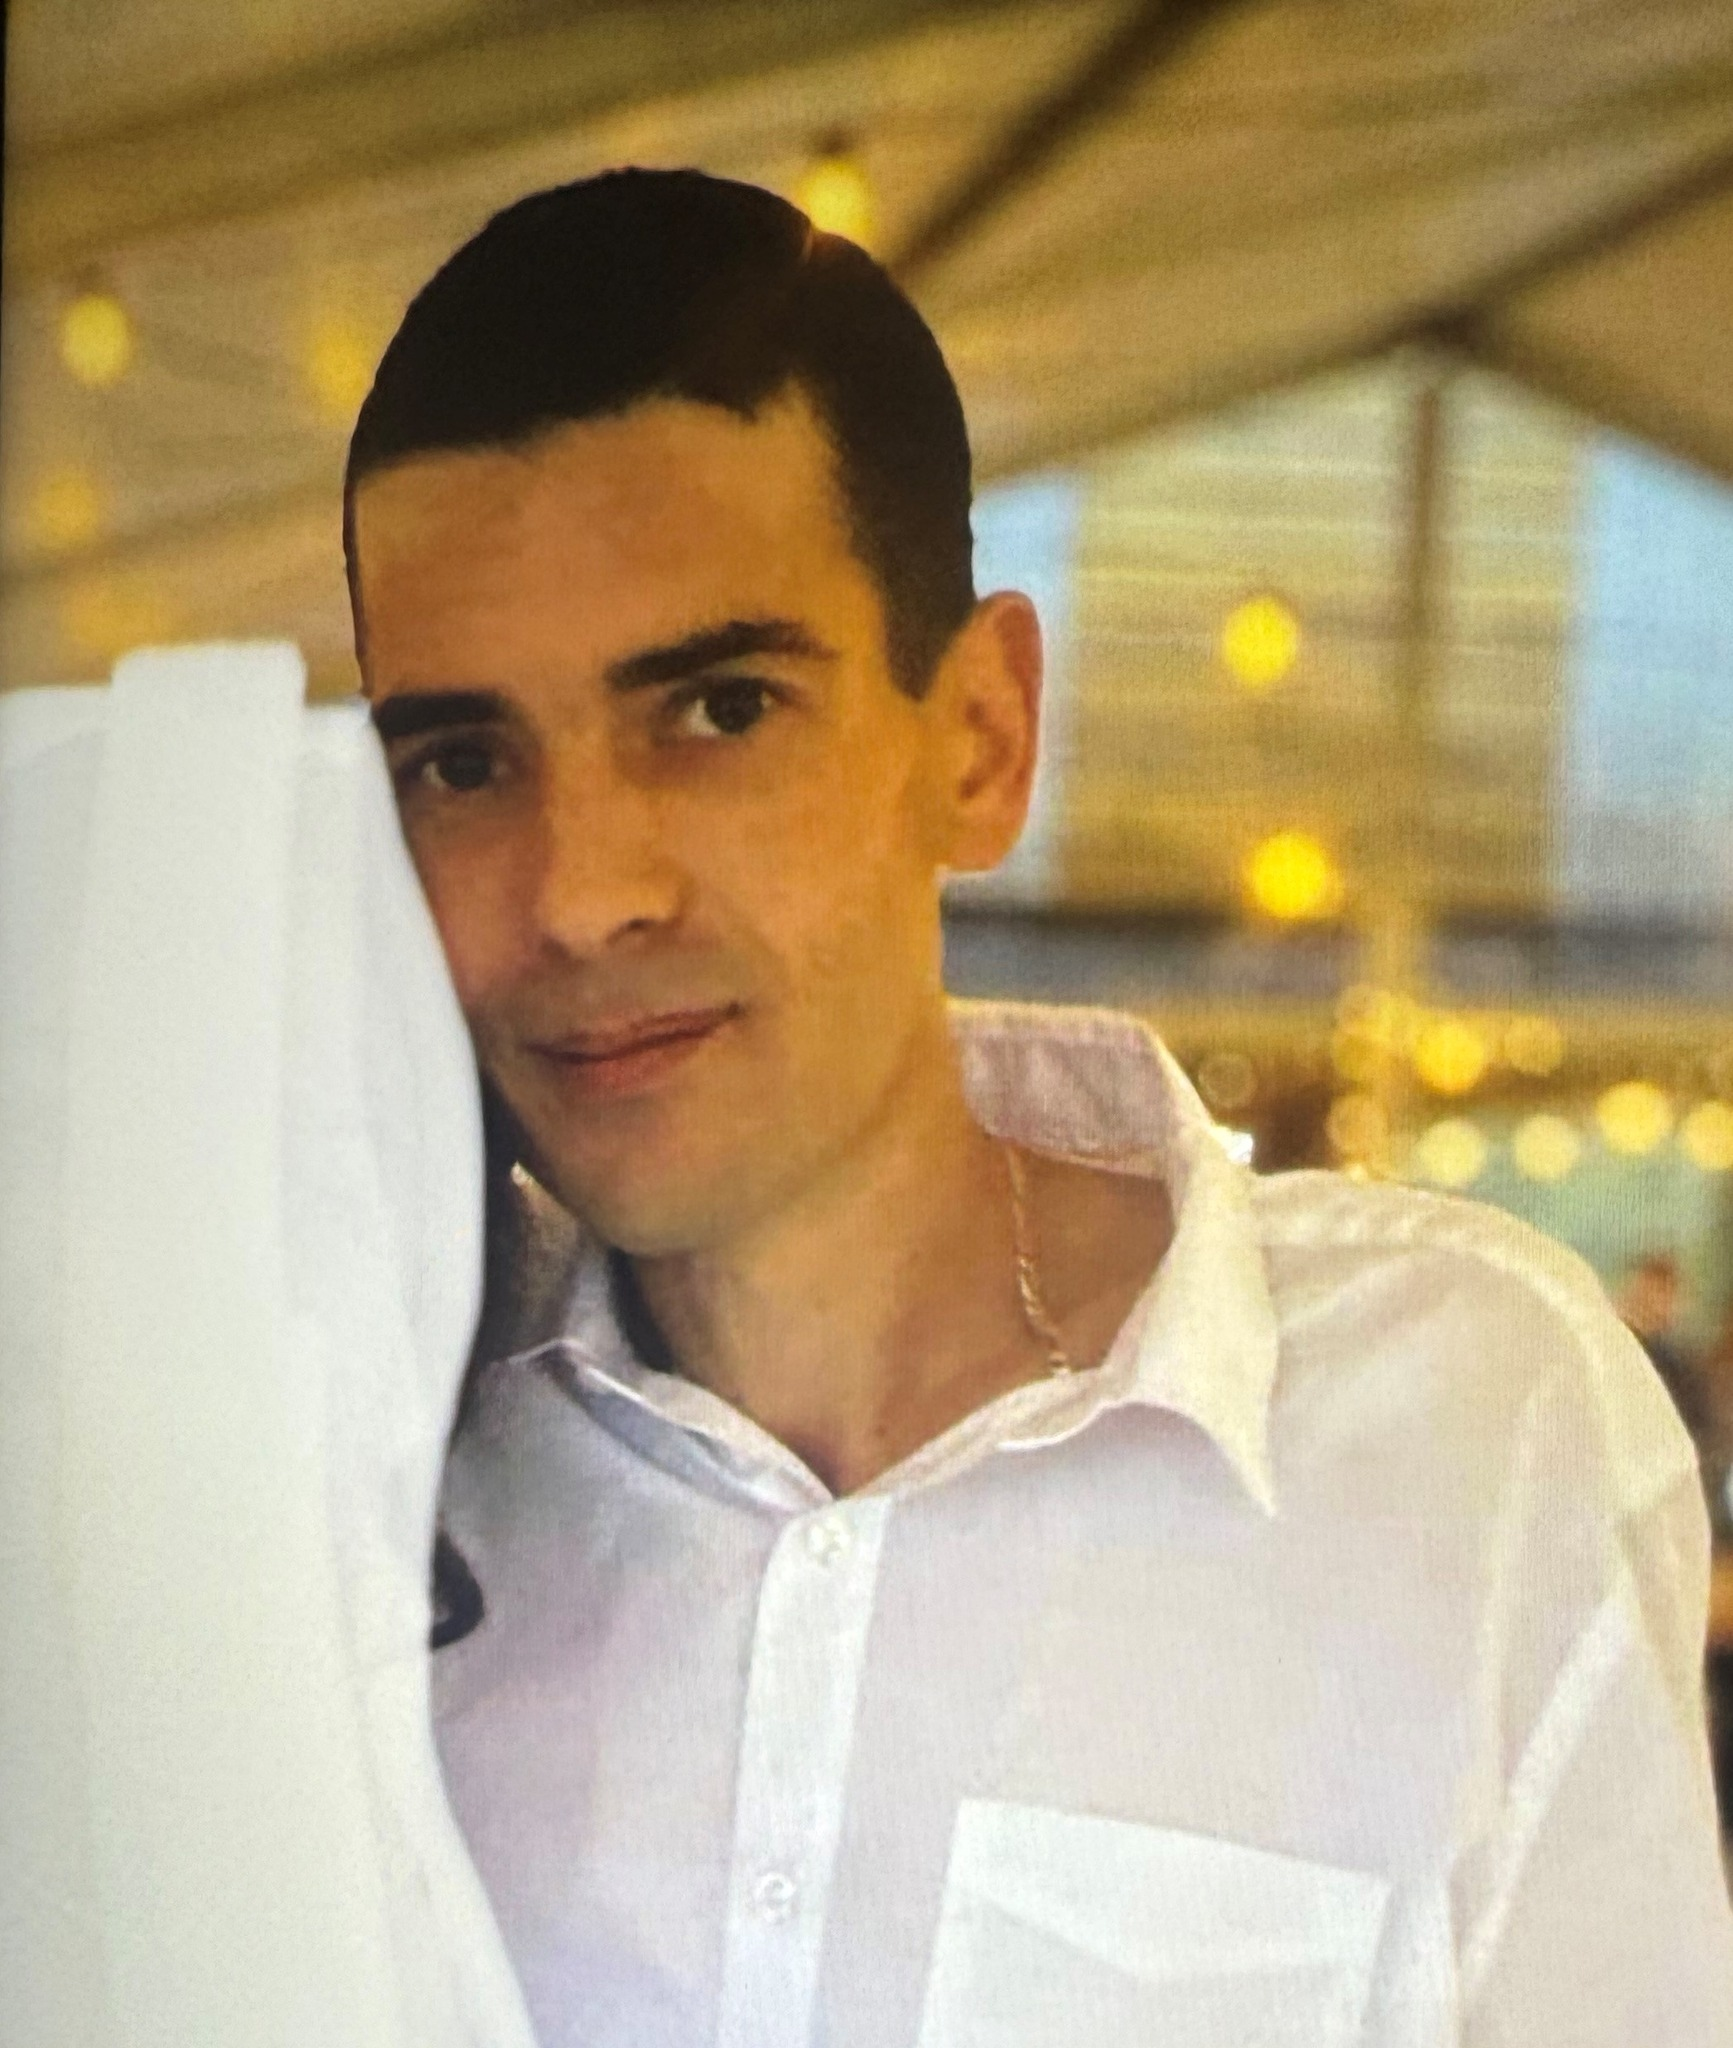 Man missing from South Kempsey cover image